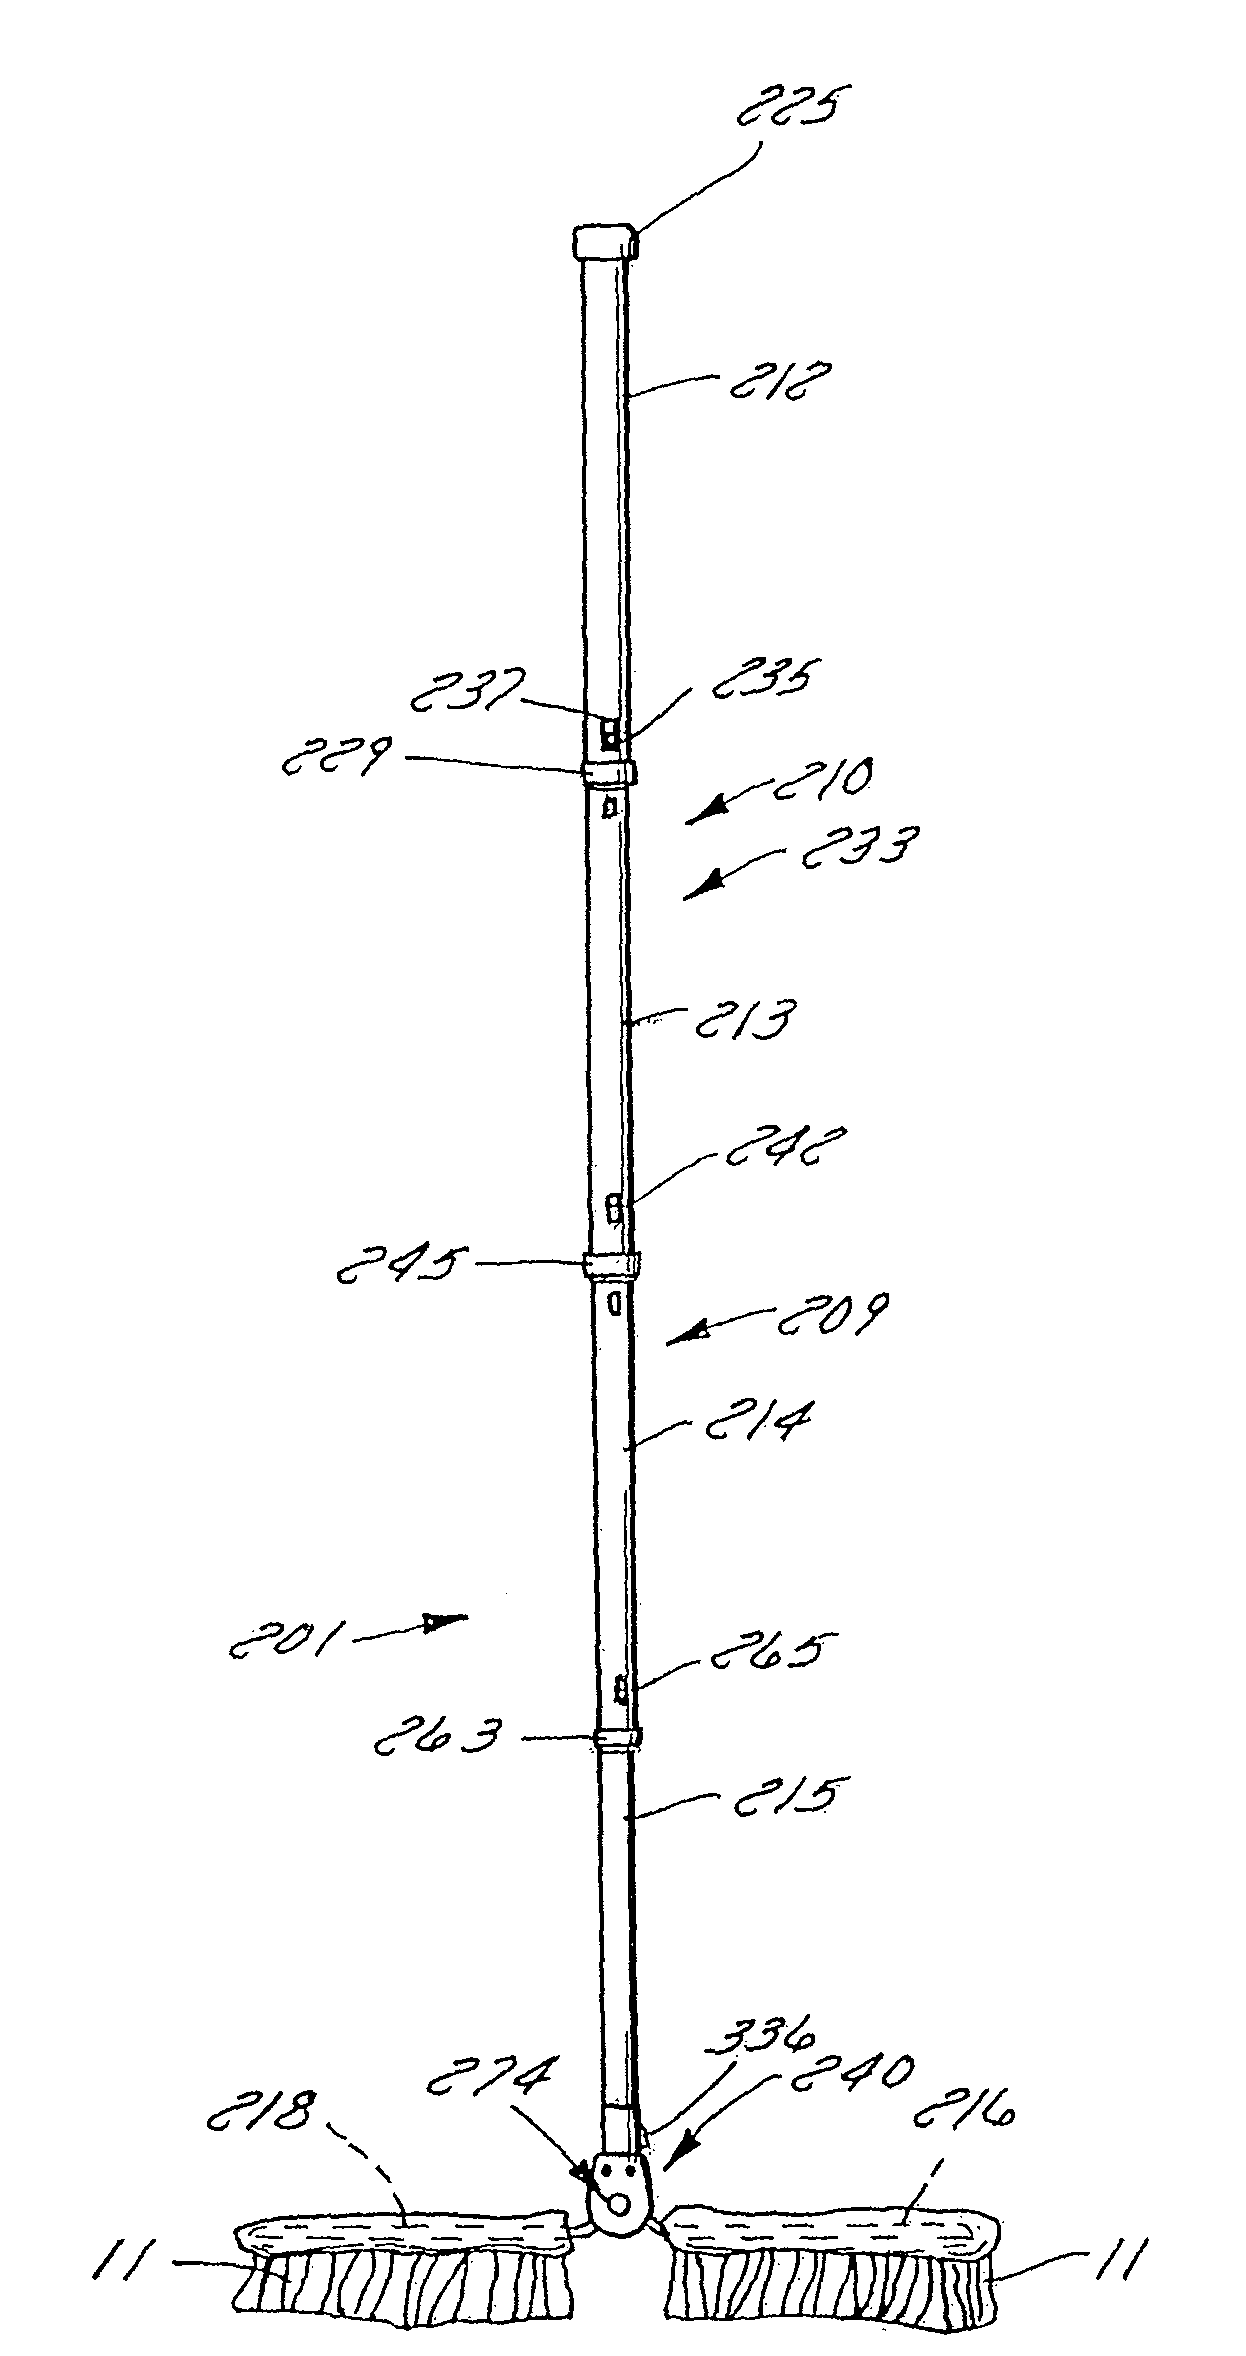 Extendable cleaning implement having two support heads